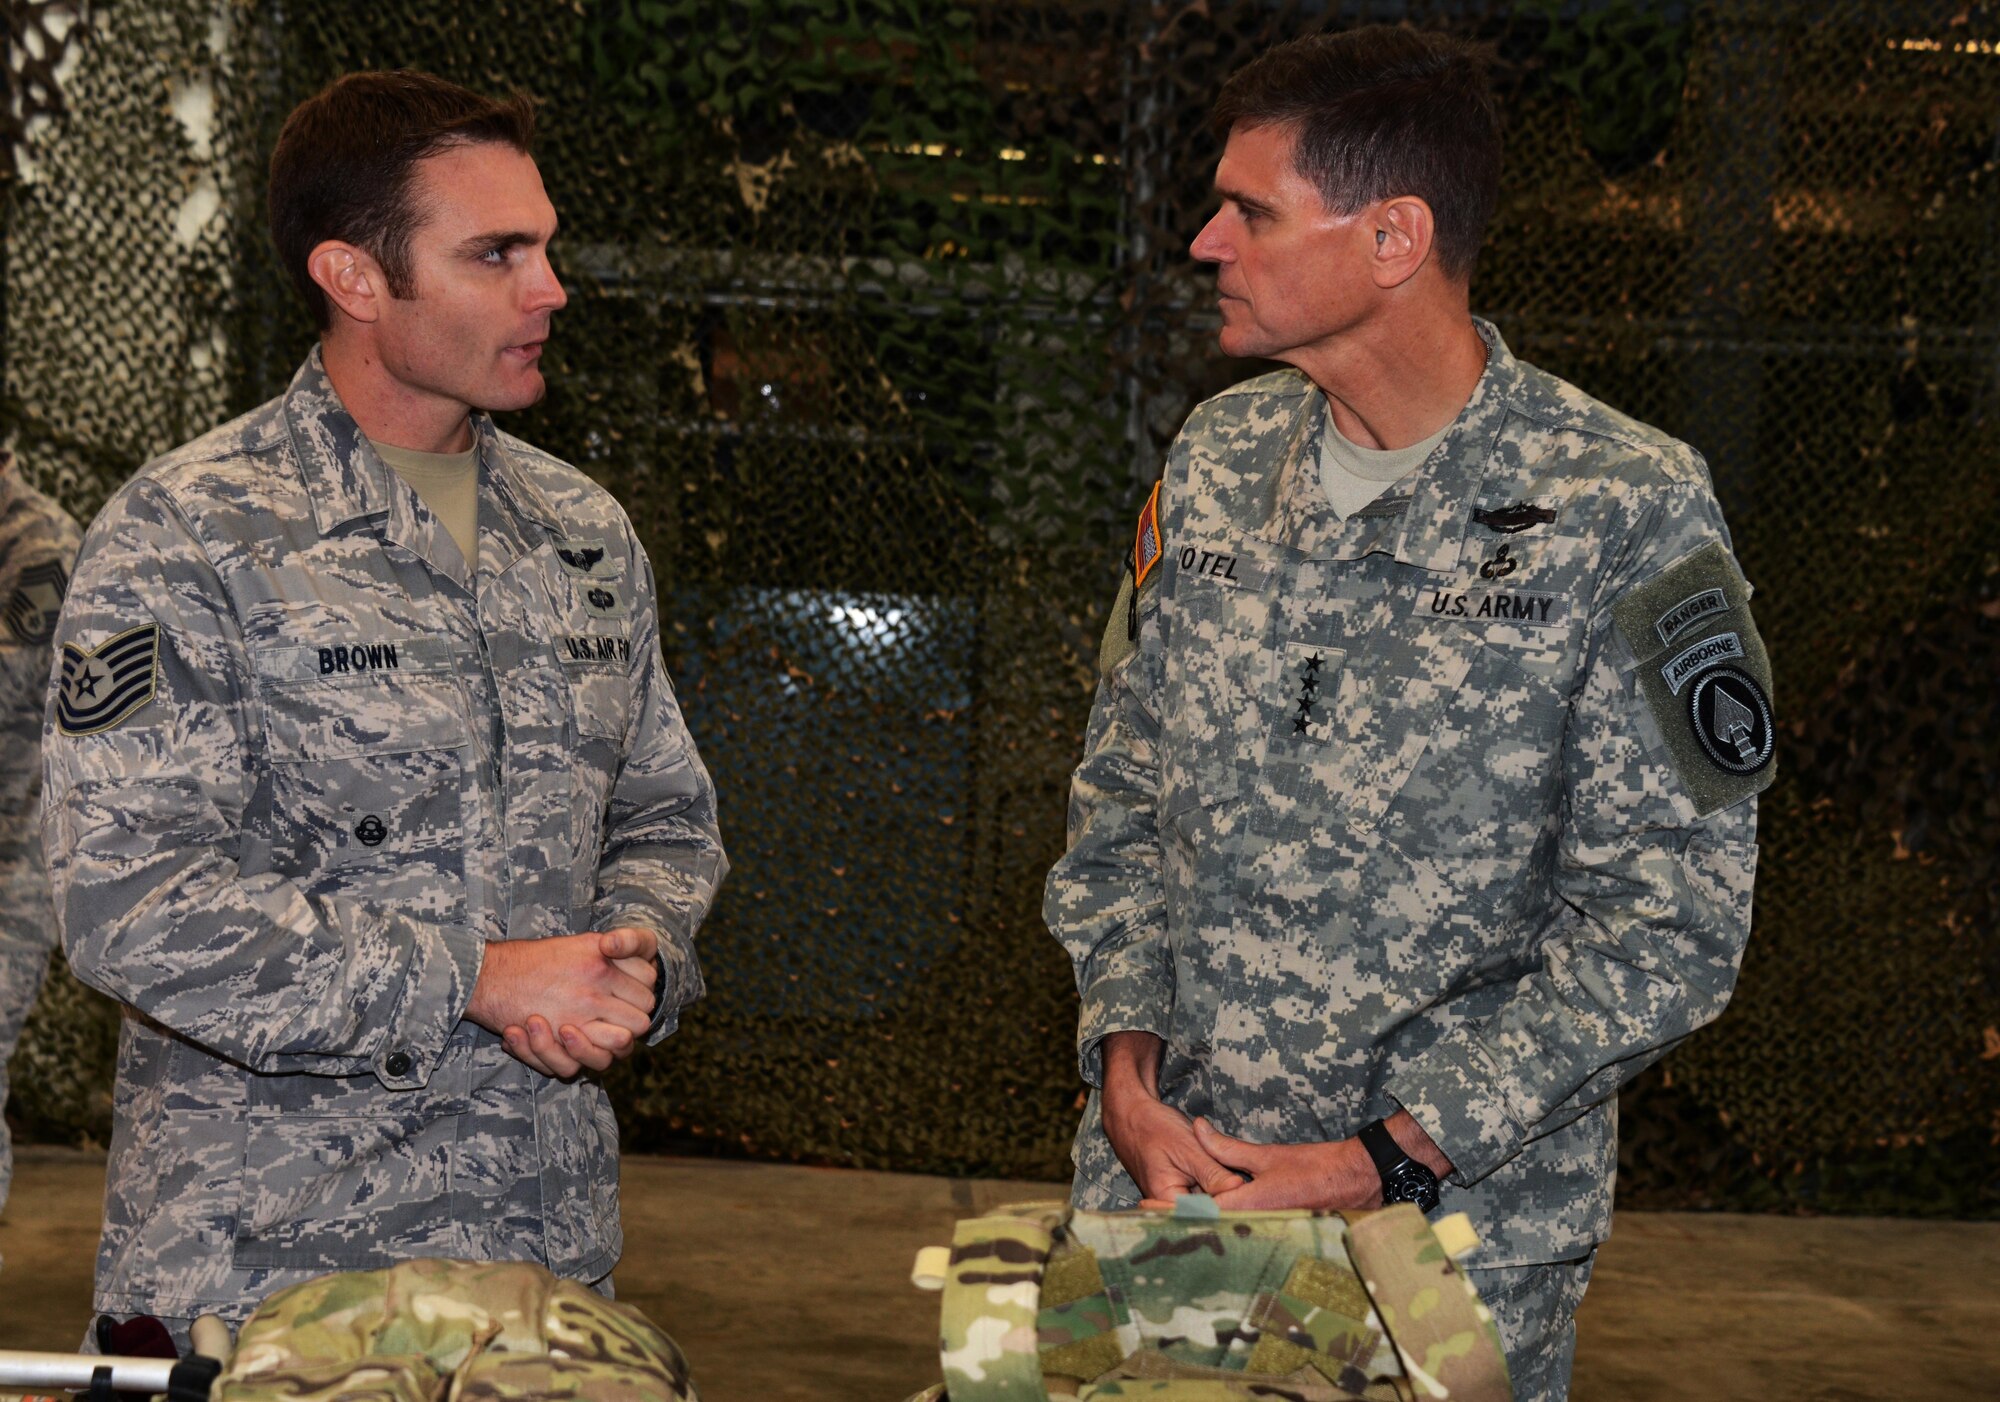 From left, Tech. Sgt. Joshua Brown, a pararescueman with the 320th Special Tactics Squadron, briefs U.S. Army Gen. Joseph Votel, during a visit Dec. 15, 2014 at Kadena Air Base, Japan.  As commander of the U.S. Special Operations Command, Votel directs all U.S. Special Operations Forces and is in charge of organizing, training, equipping and deploying special operators such as the Air Commandos of the 353rd Special Operations Group. (U.S. Air Force photo by Tech. Sgt. Kristine Dreyer)